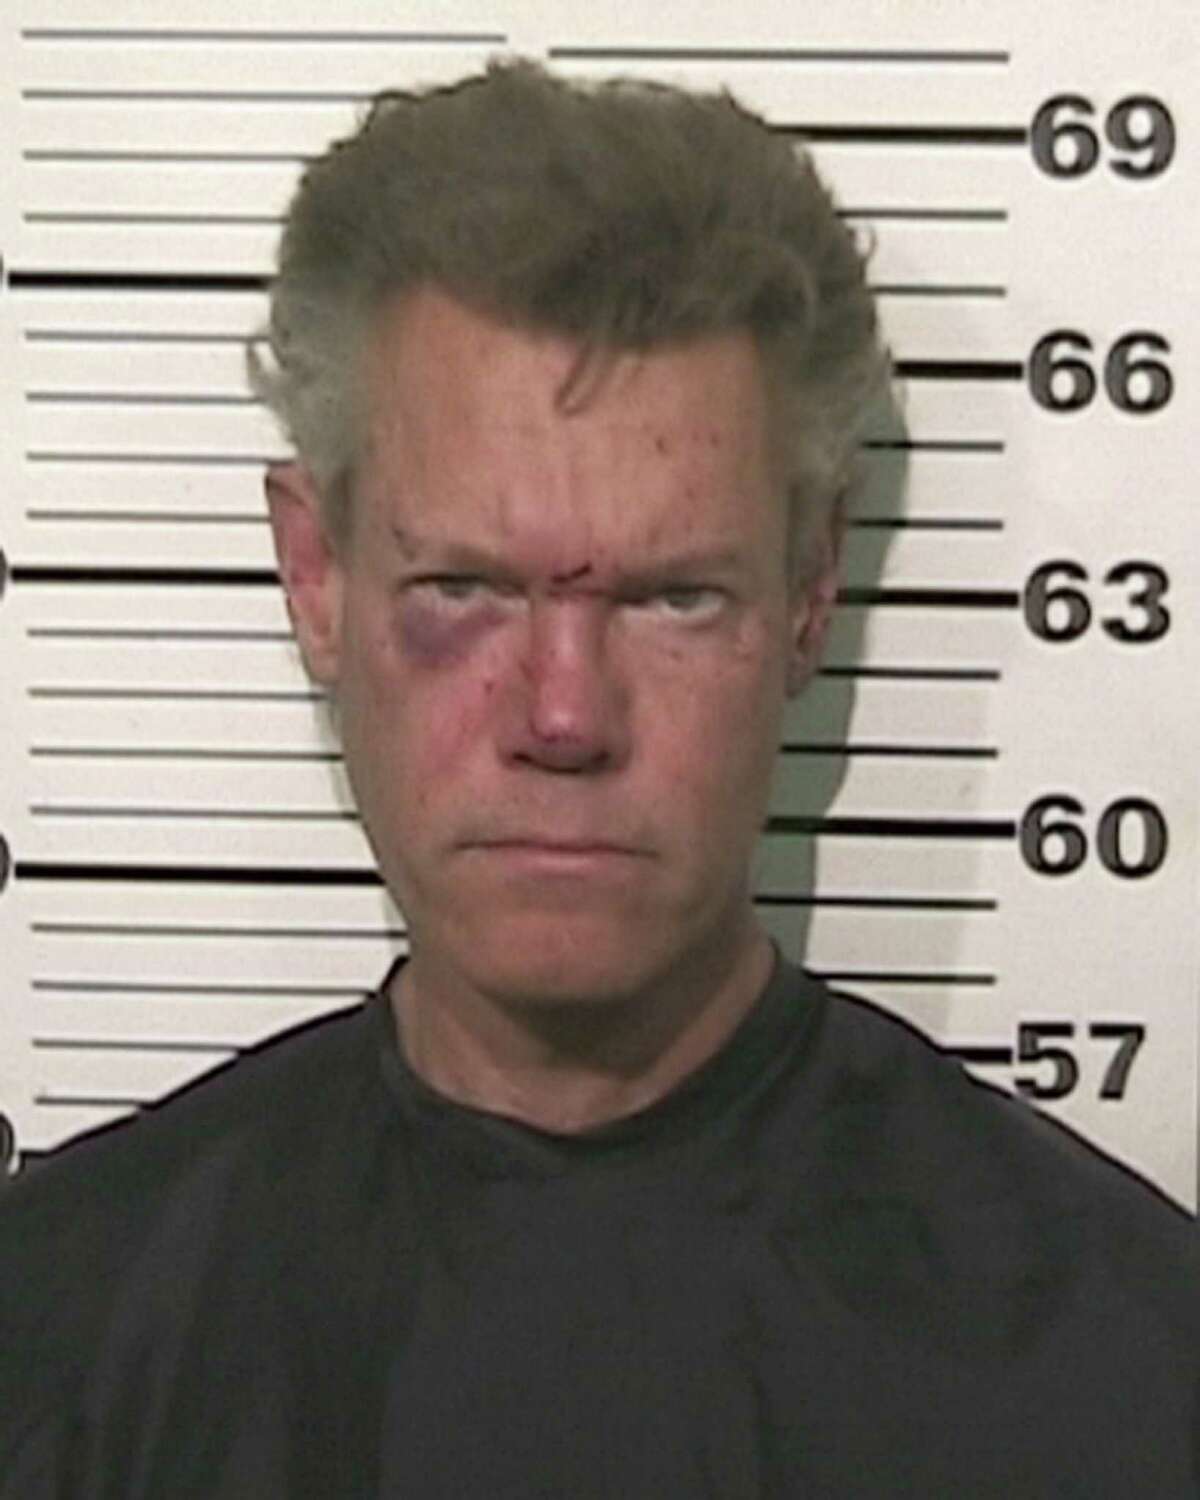 Randy Travis' booking photo shows injuries sustained in the crash.